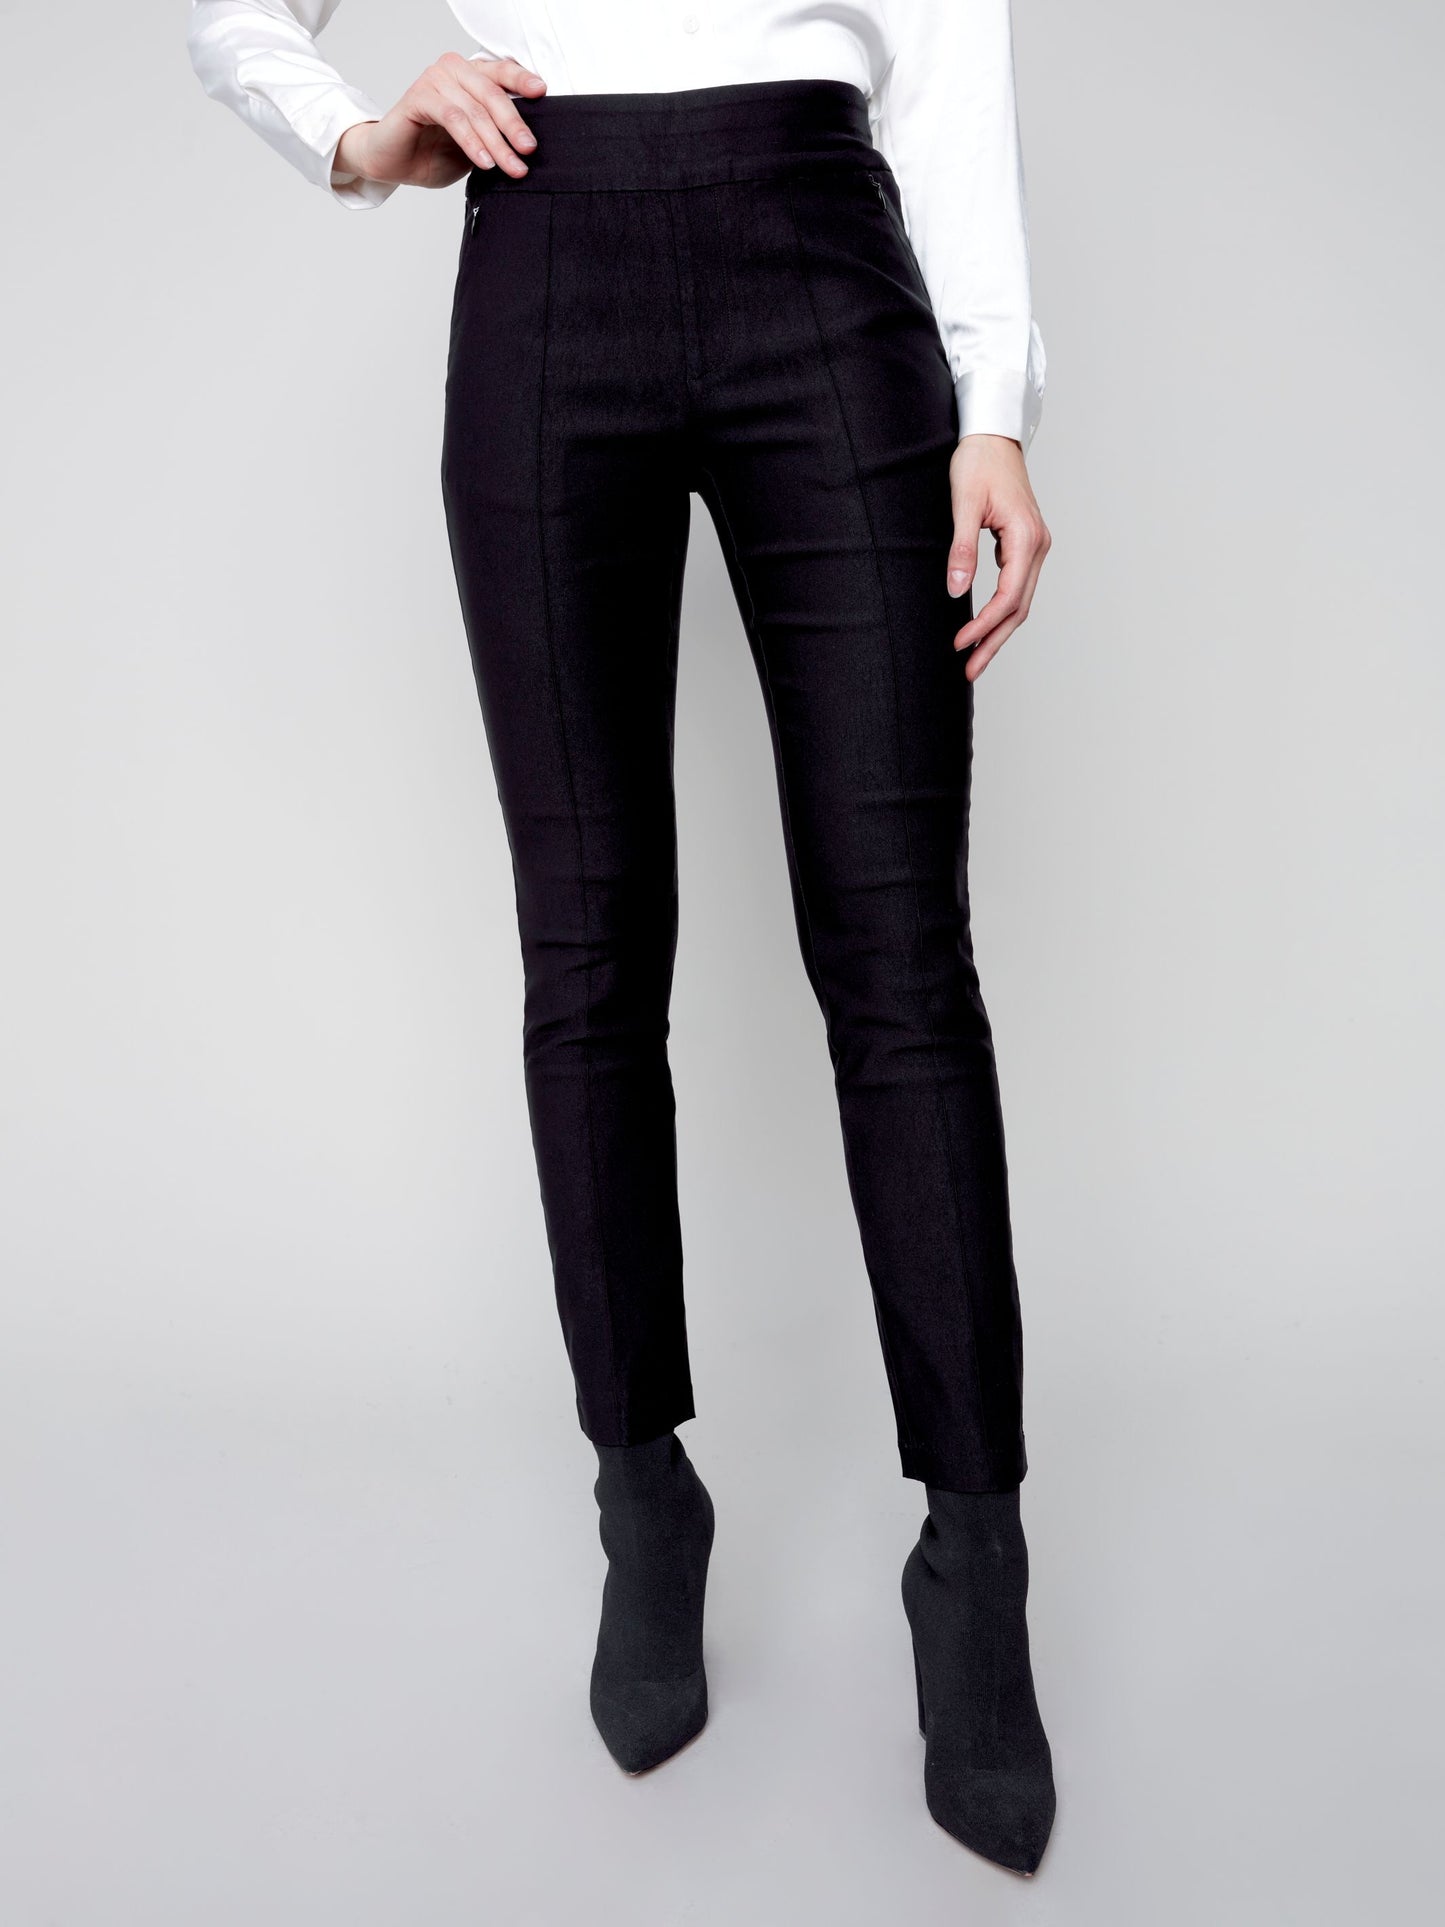 CB Smooth Stretch Pull on Pant